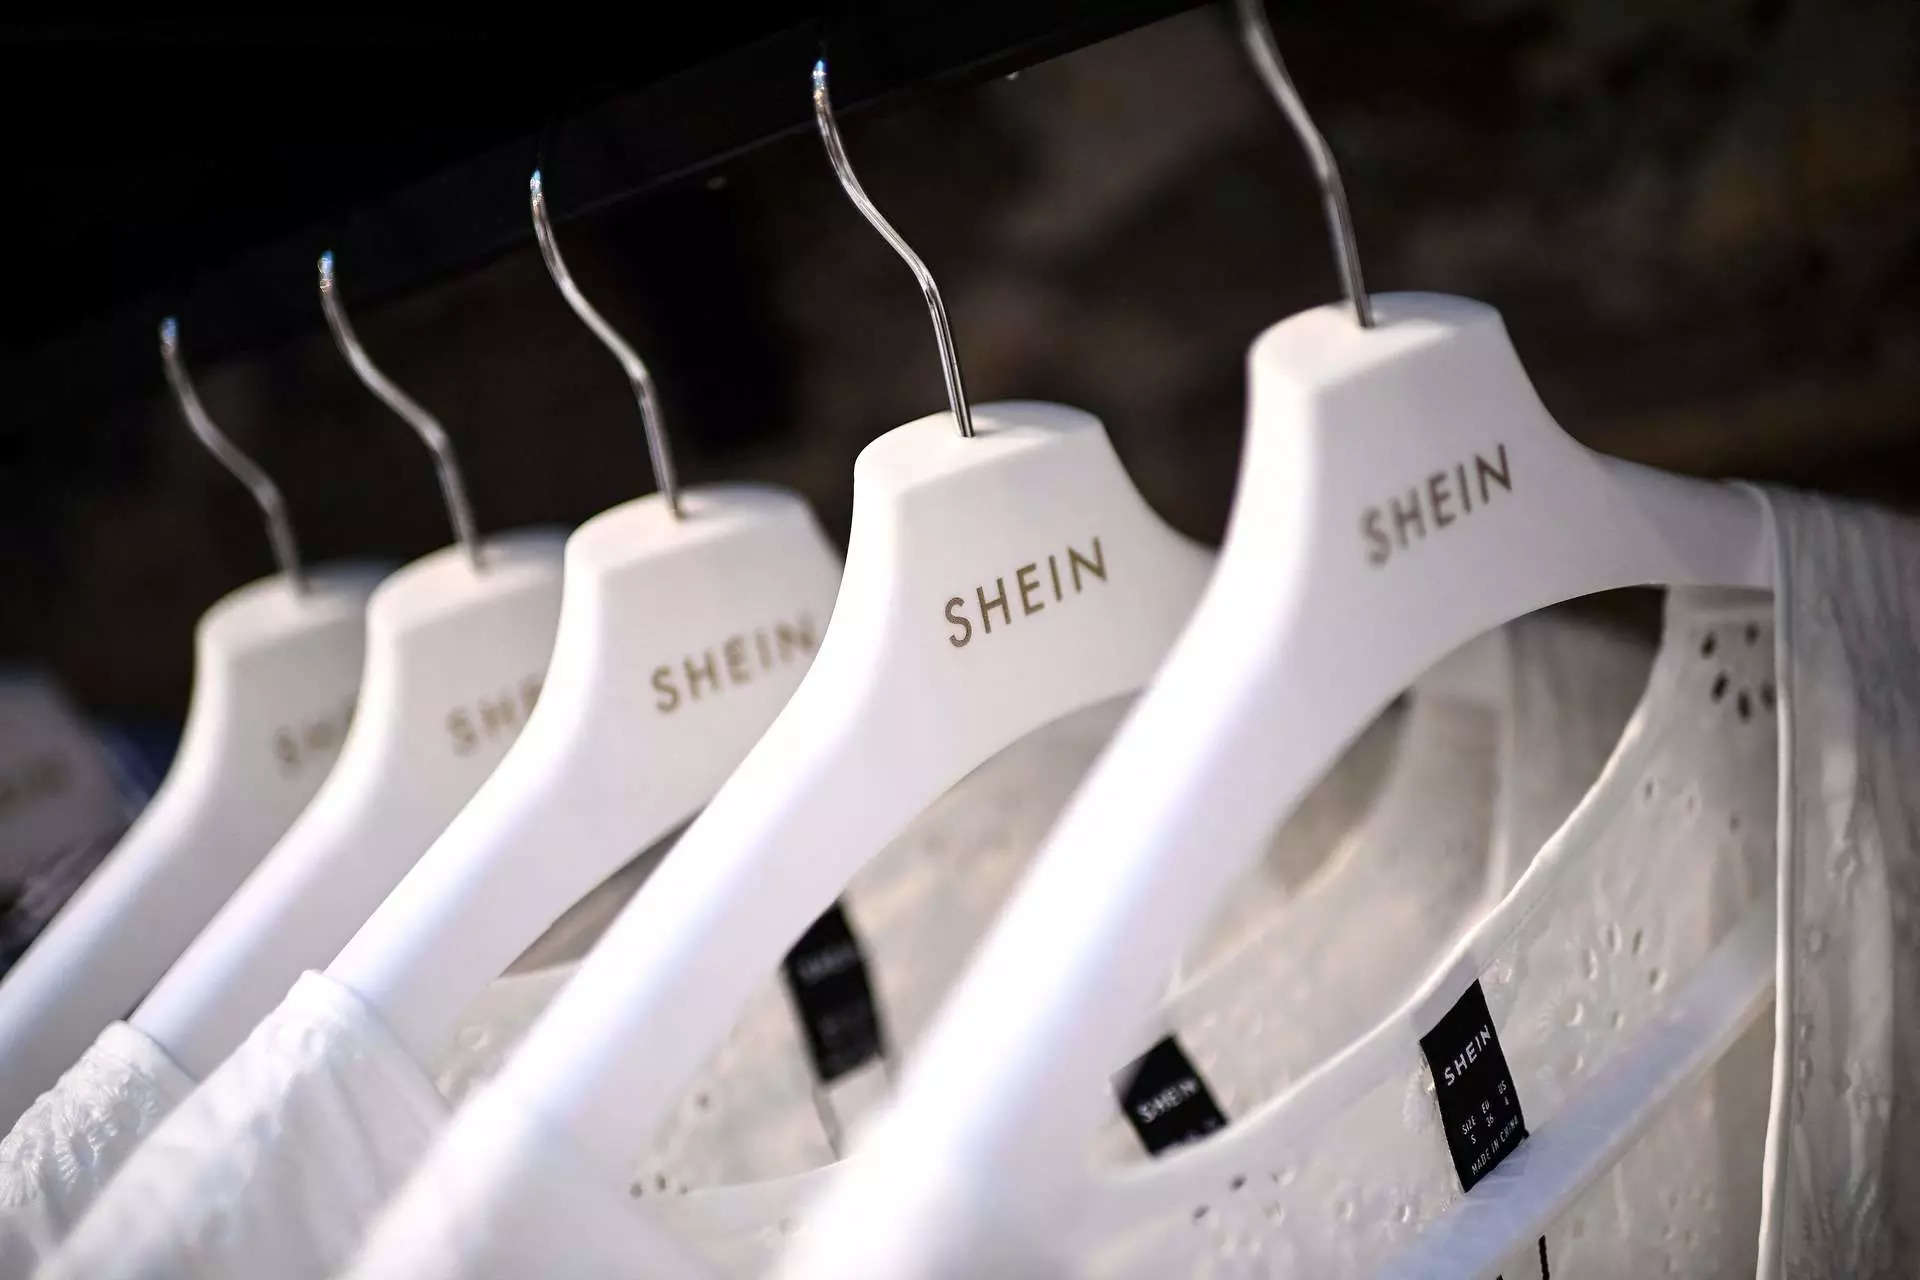 <p>Clothes are displayed on hangers at a Chinese fashion brand Shein pop-up store in Paris on May 4, 2023. The Shein pop-up store is set to open for business from May 5 to 8. (Photo by Christophe ARCHAMBAULT / AFP)</p>